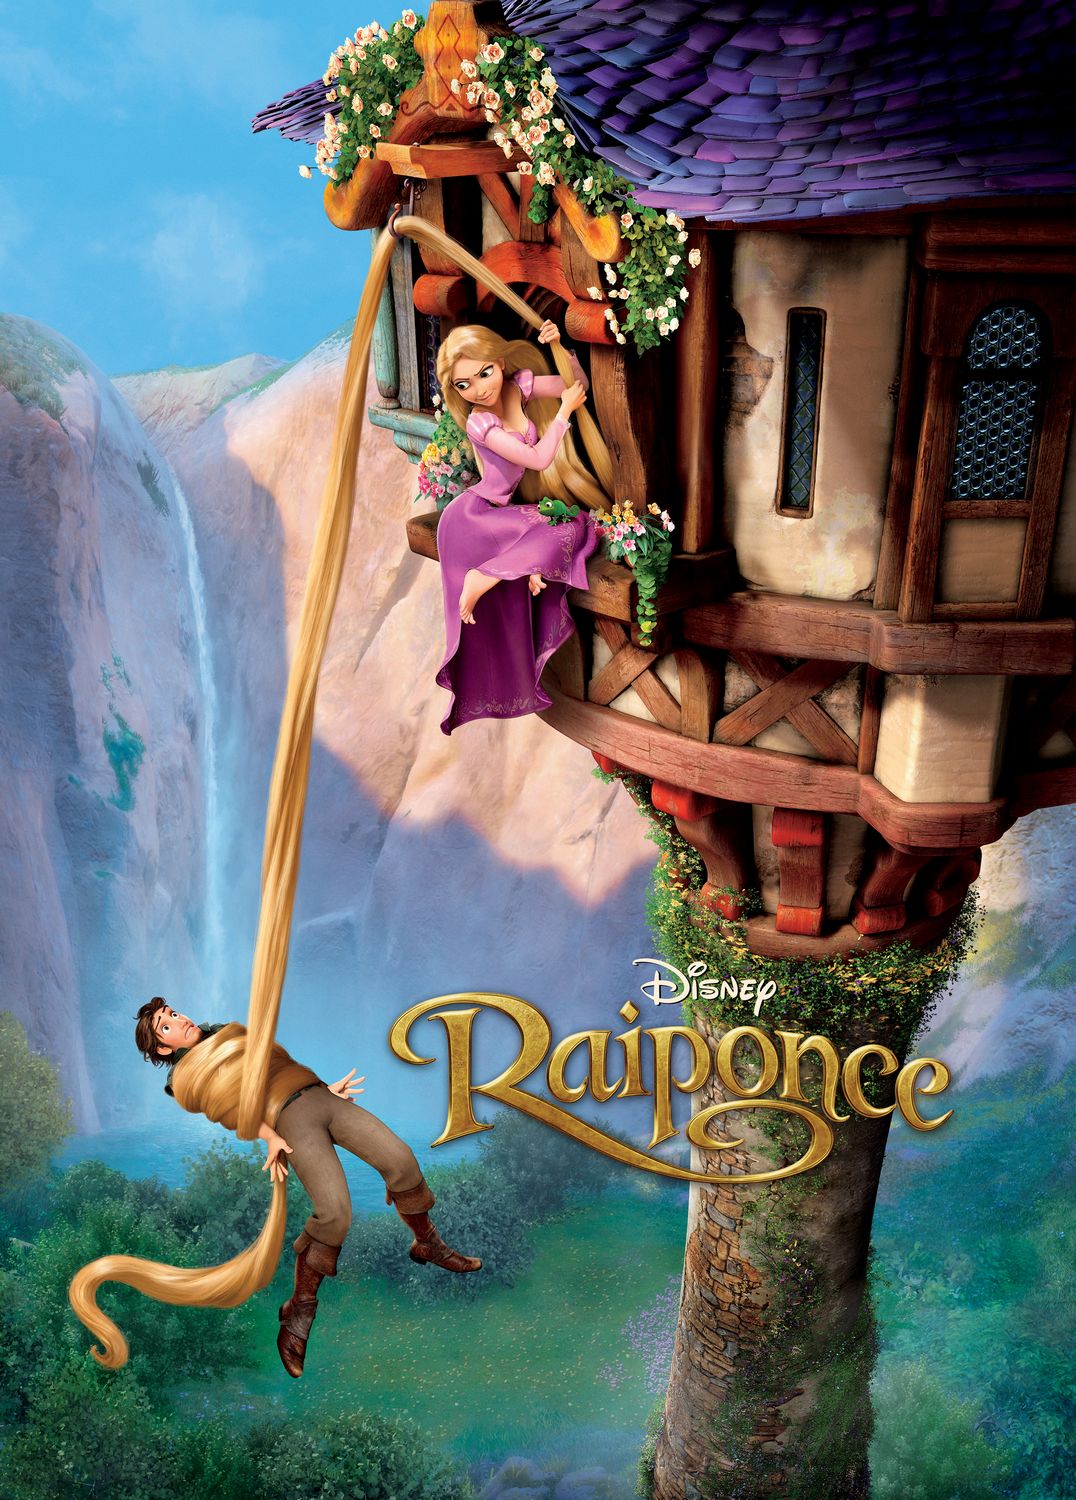  Tangled (Rapunzel) poster from France